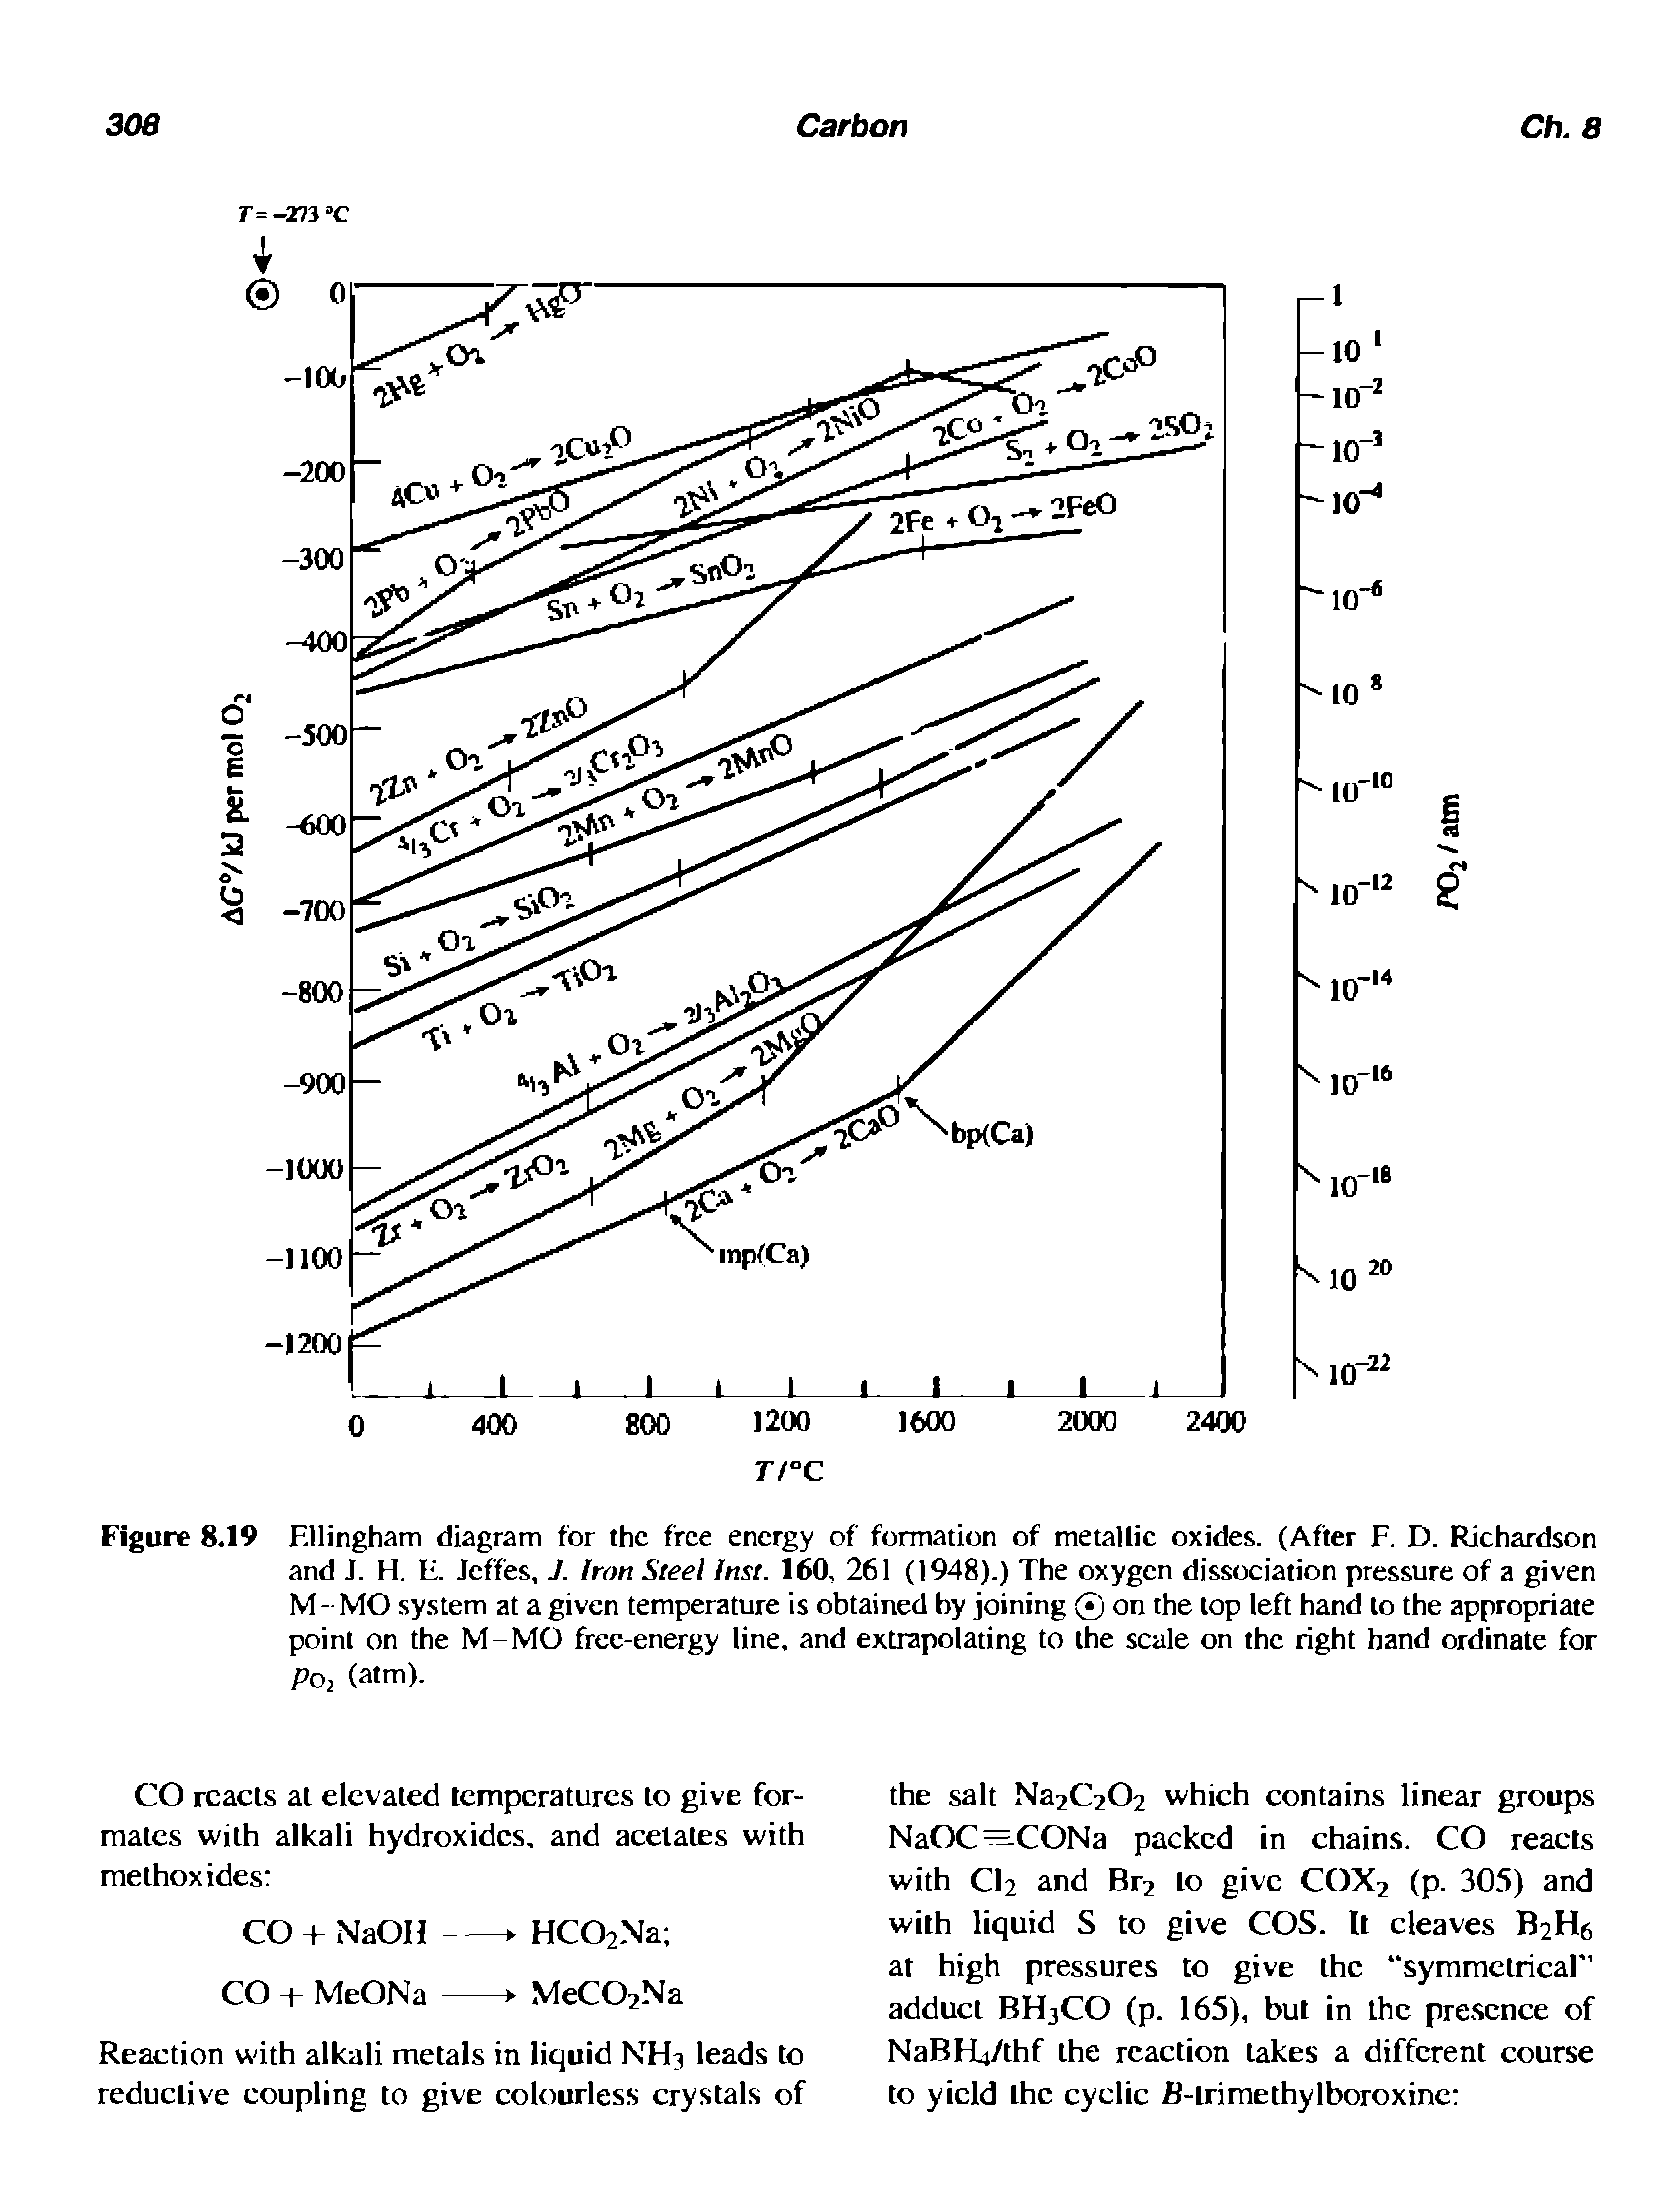 Figure 8.19 F.llingham diagram for the free energy of formation of metallic oxides. (After F. D. Richardson and J. H. F. Jeffes, J. Iron Steel Inst. 160, 261 (1948).) The oxygen dissociation pressure of a given M - MO system at a given temperature is obtained by joining on the lop left hand to the appropriate point on the M-MO frec-energy line, and extrapolating to the scale on the right hand ordinate for POi (atm).